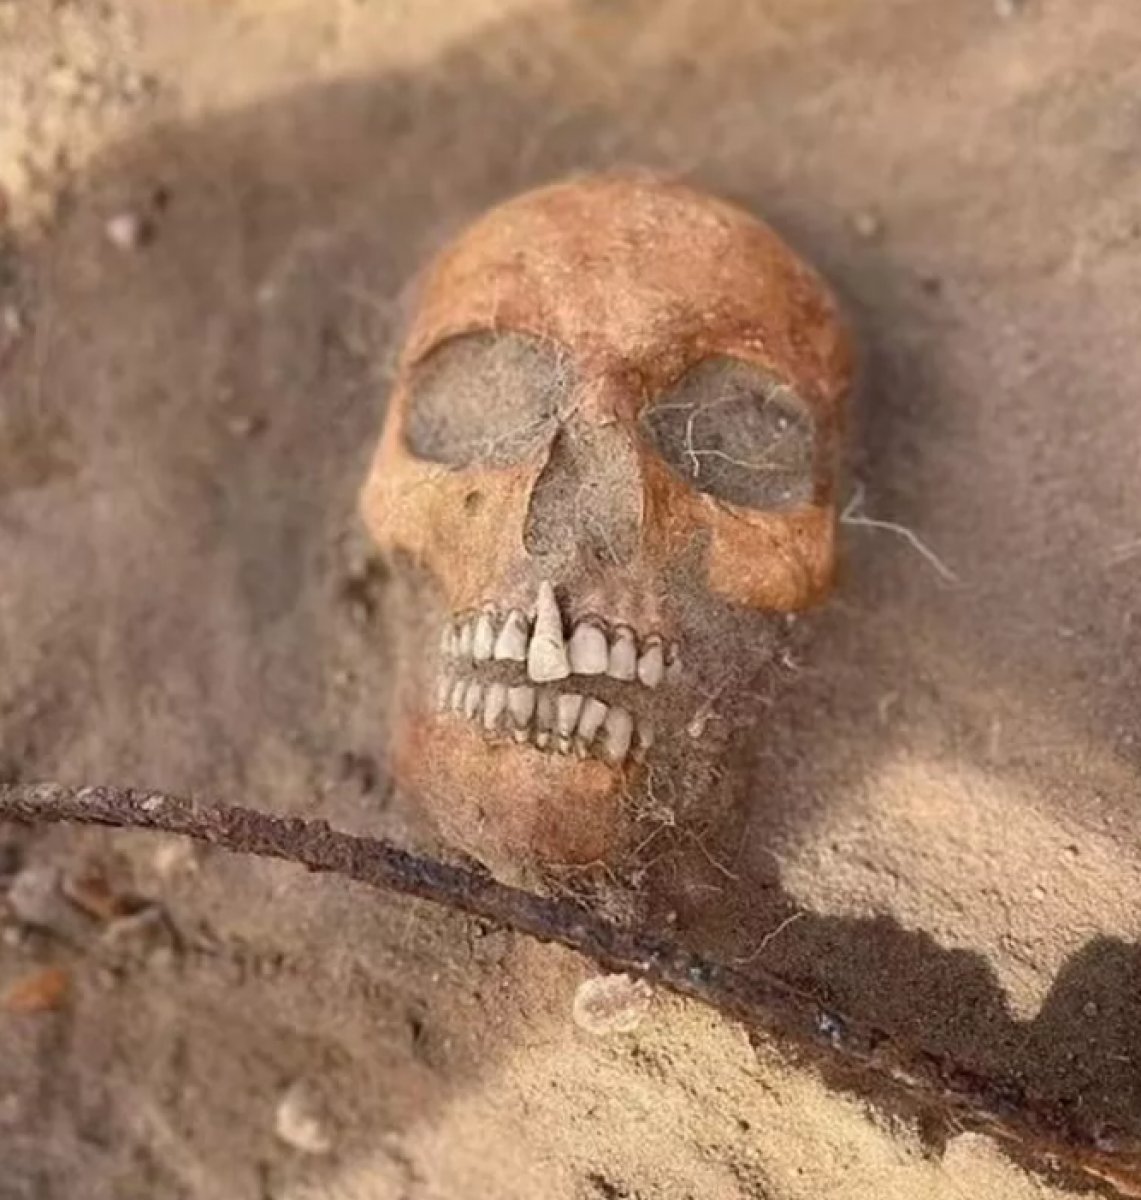 Skeleton thought to belong to 'female vampire' found in Poland #4